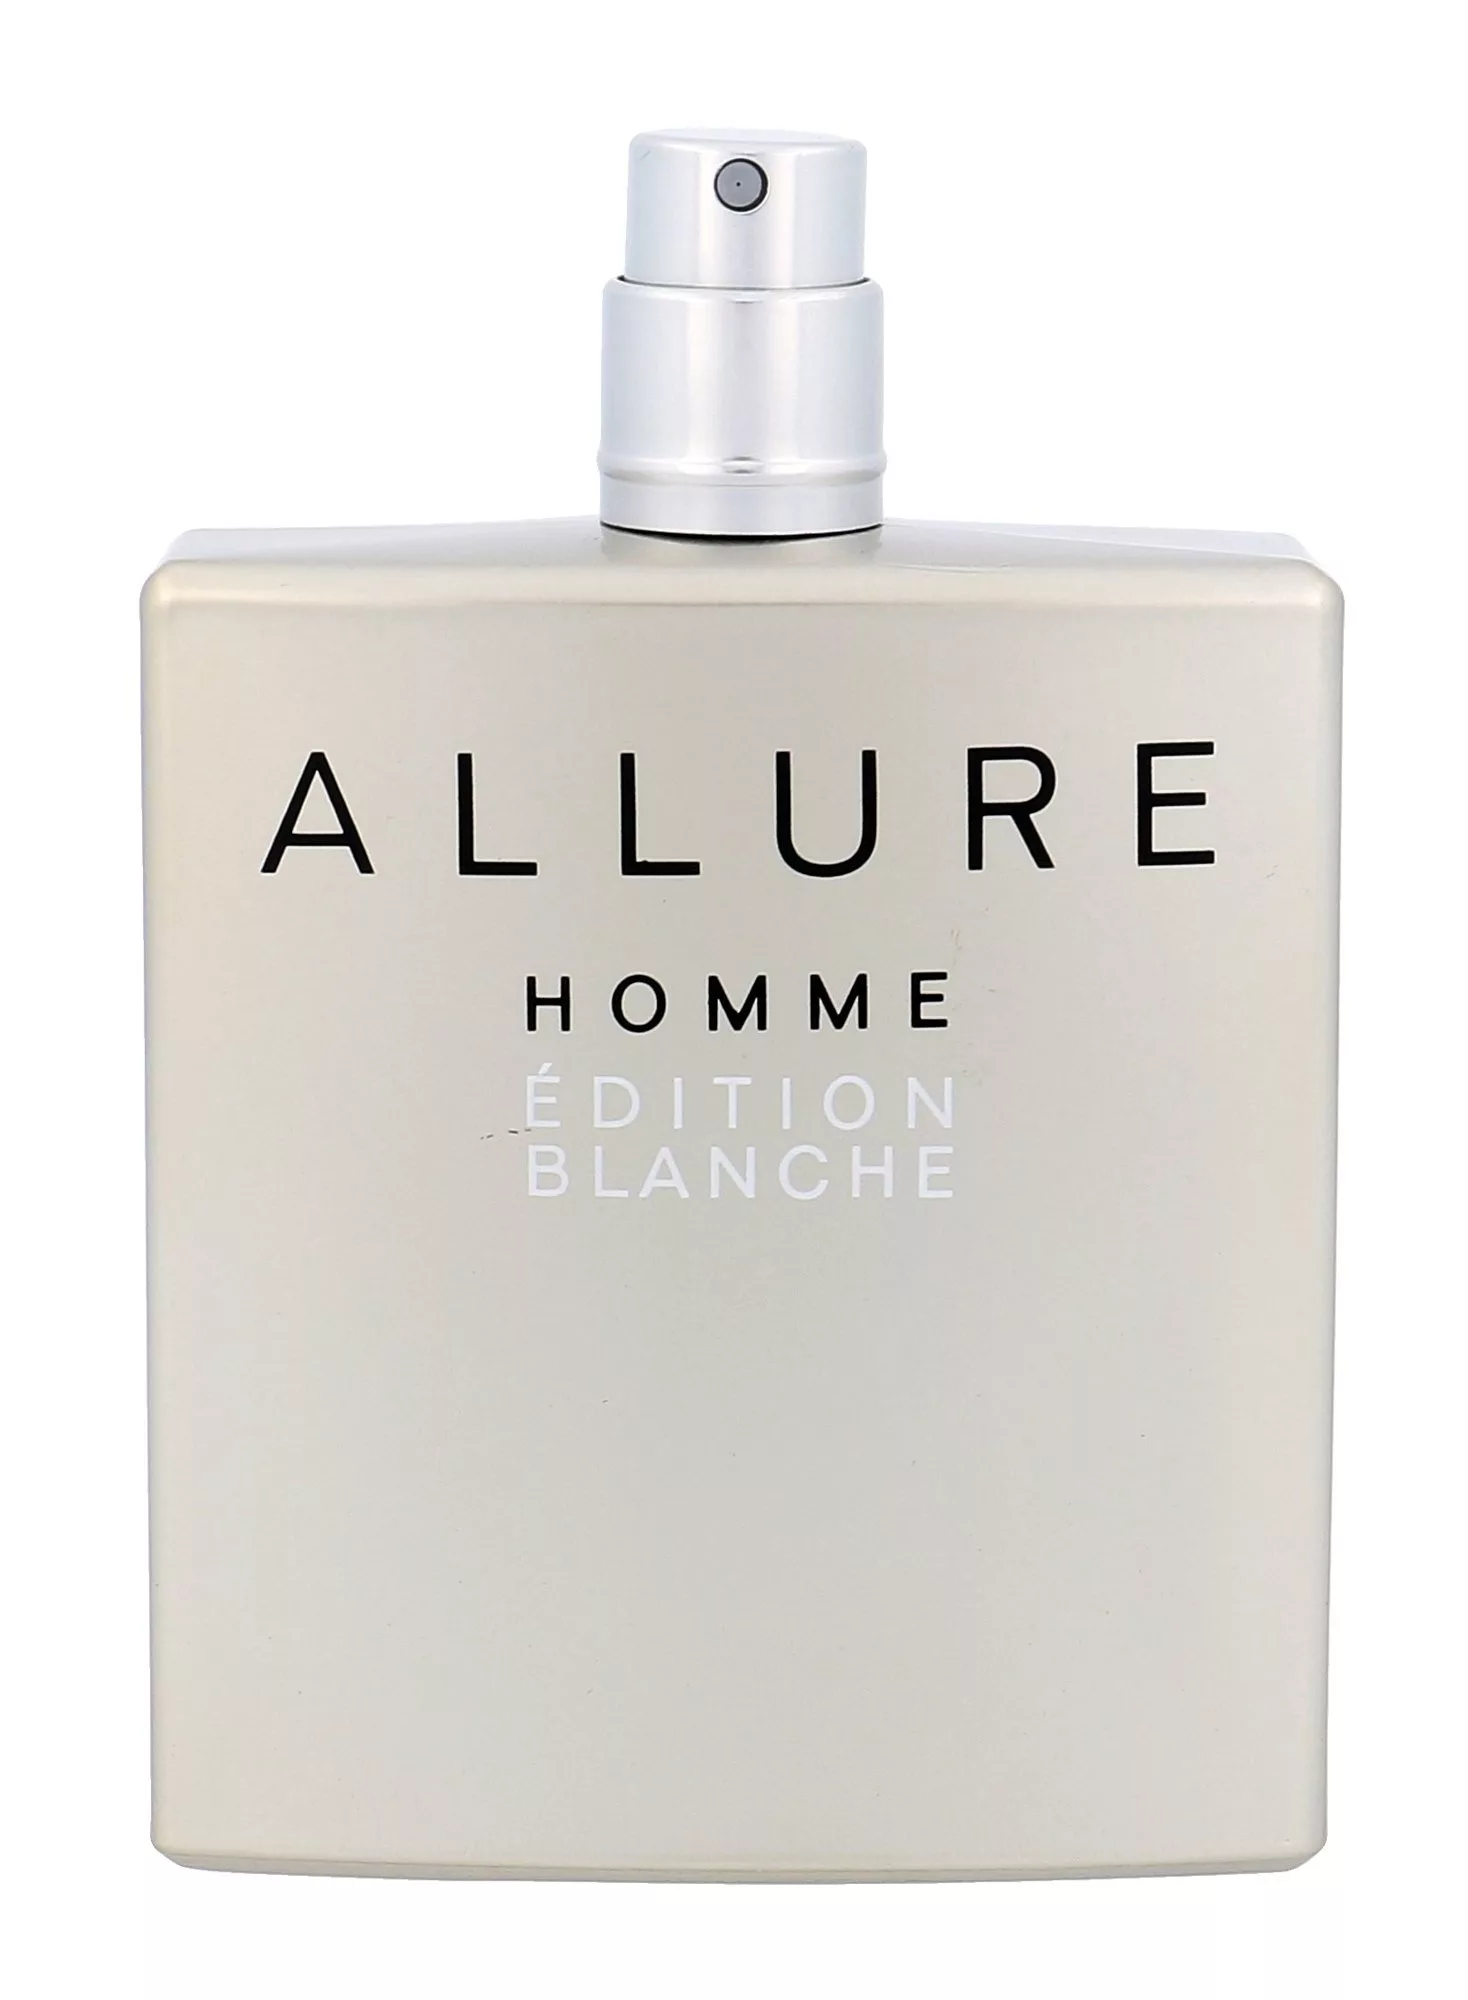 Chanel homme edition. Шанель Аллюр мужские. Chanel Allure homme Edition Blanche. Chanel Allure Edition Blanche 100ml (m). Chanel Allure homme Edition.